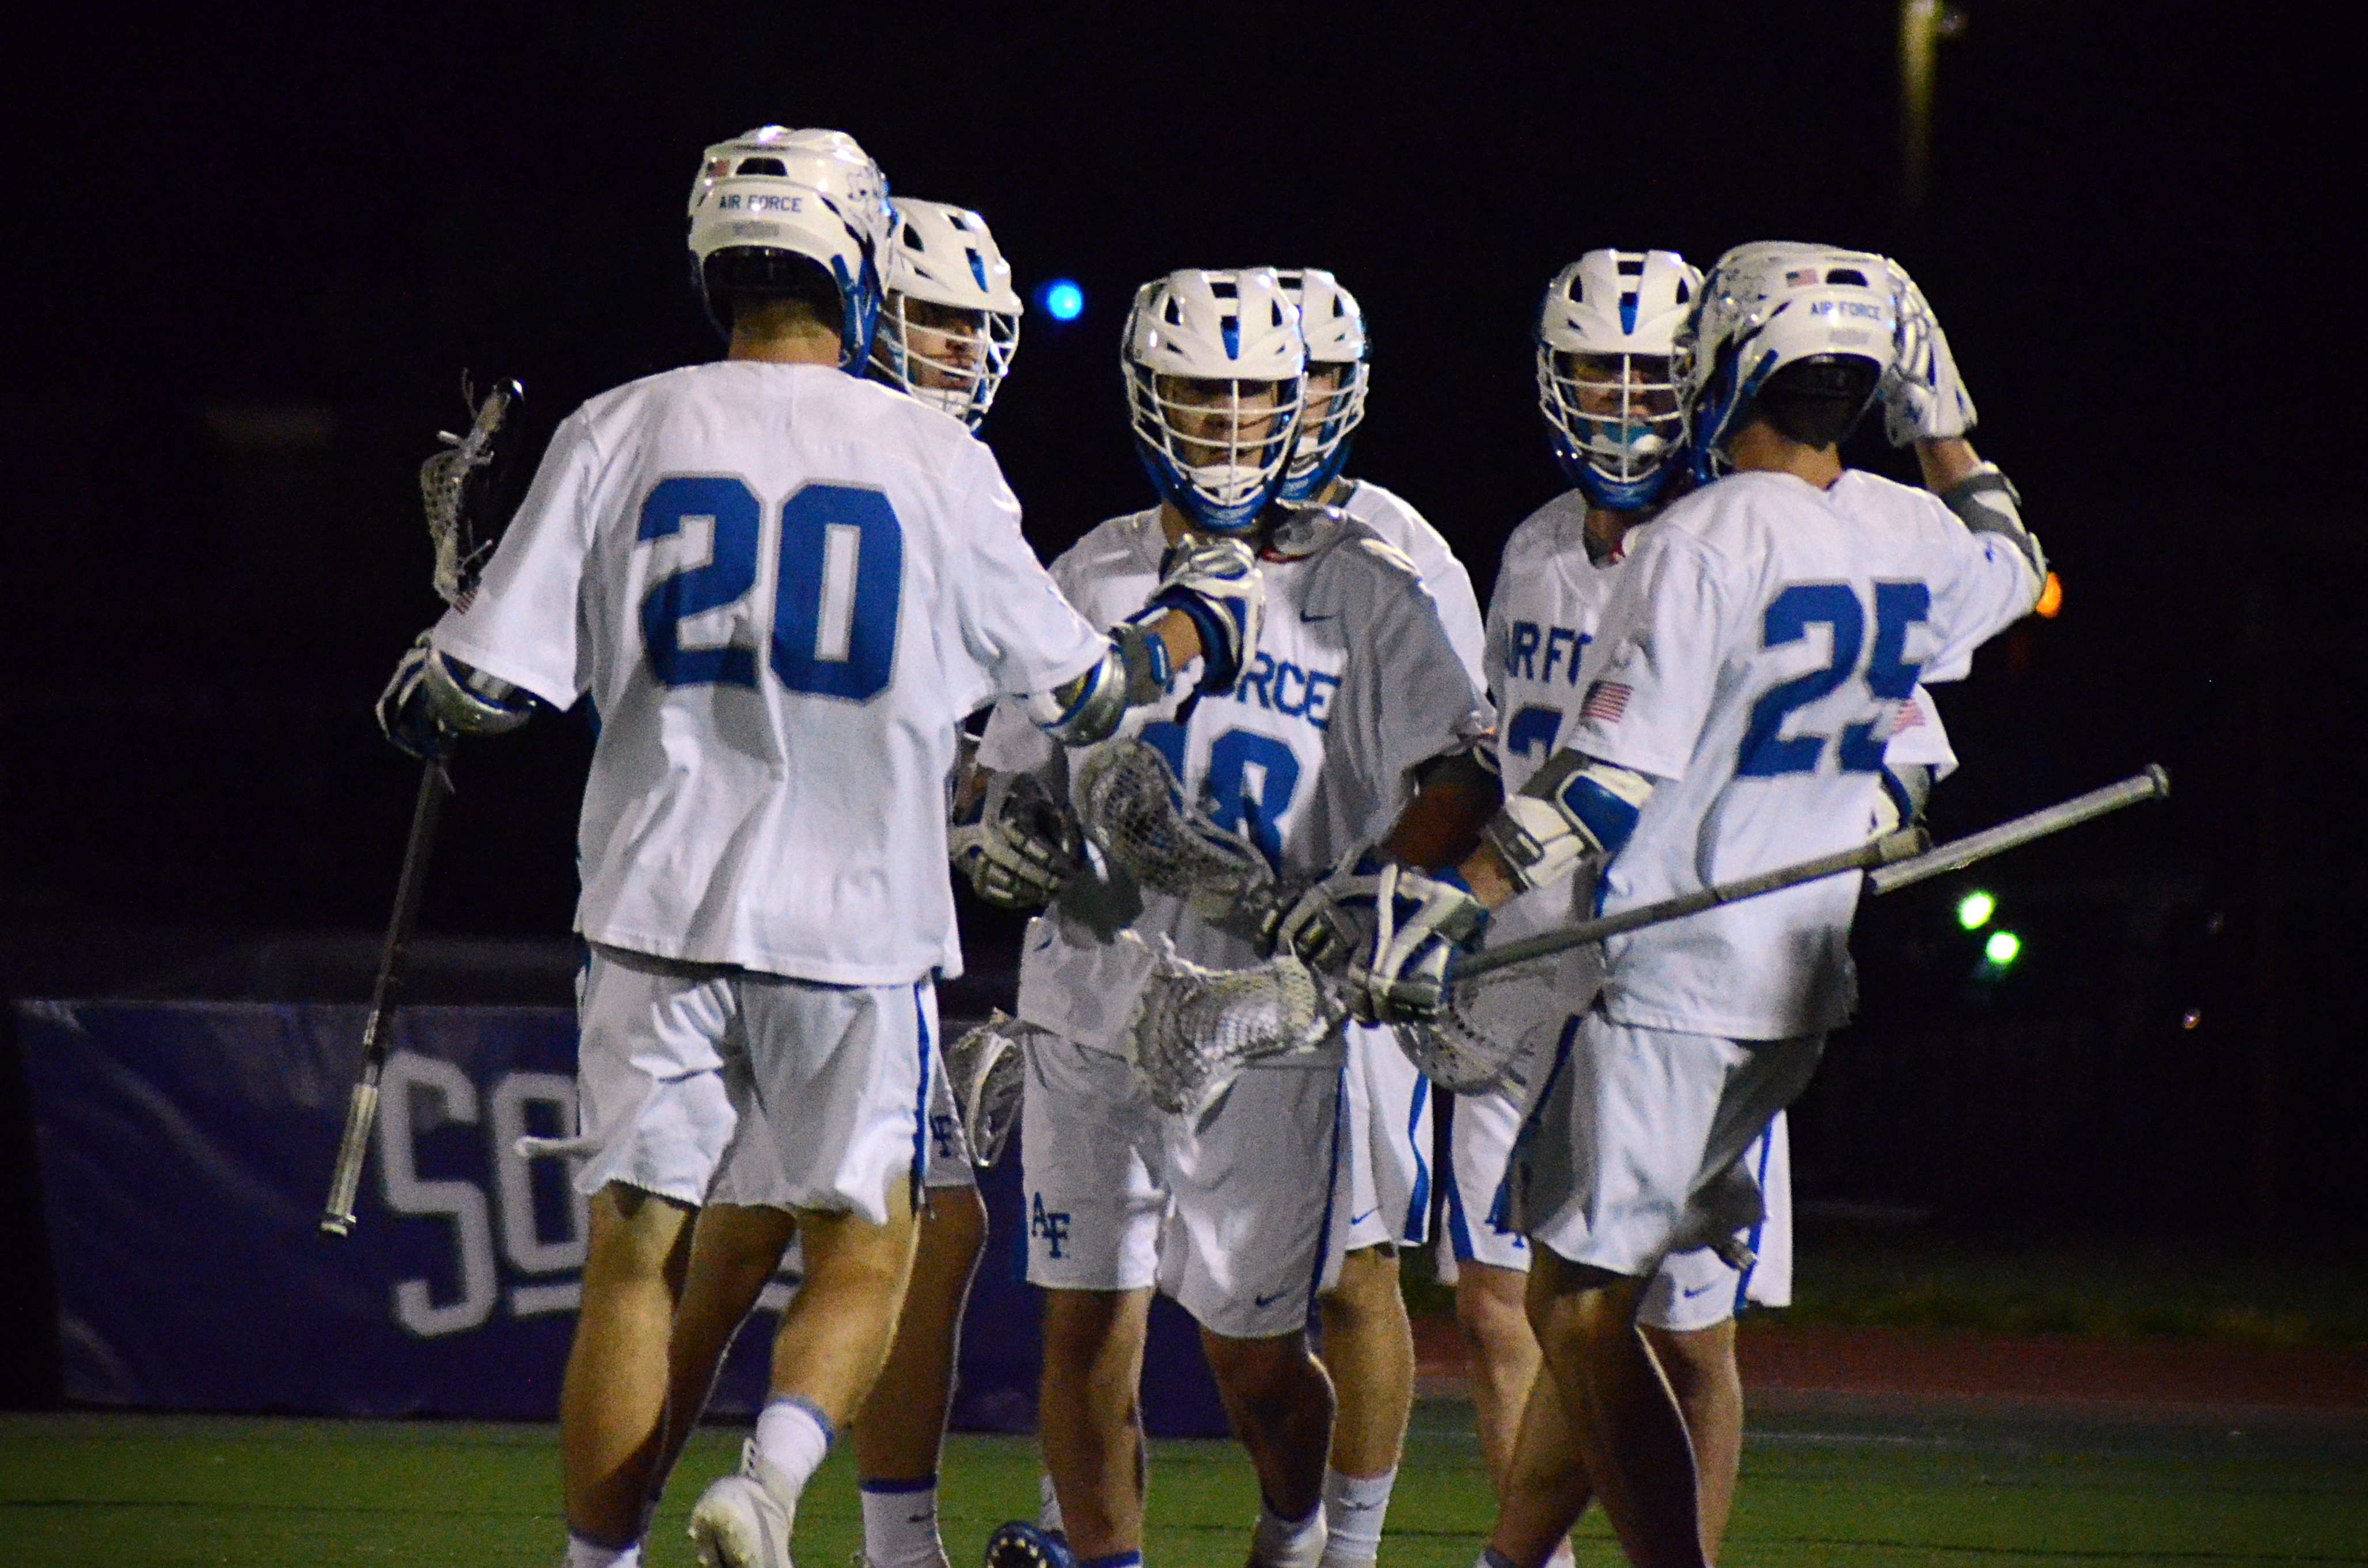 Air Force players celebrate after scoring against Richmond on Thursday, May 2, 2019 in High Point, N.C. at the SoCon Championships.